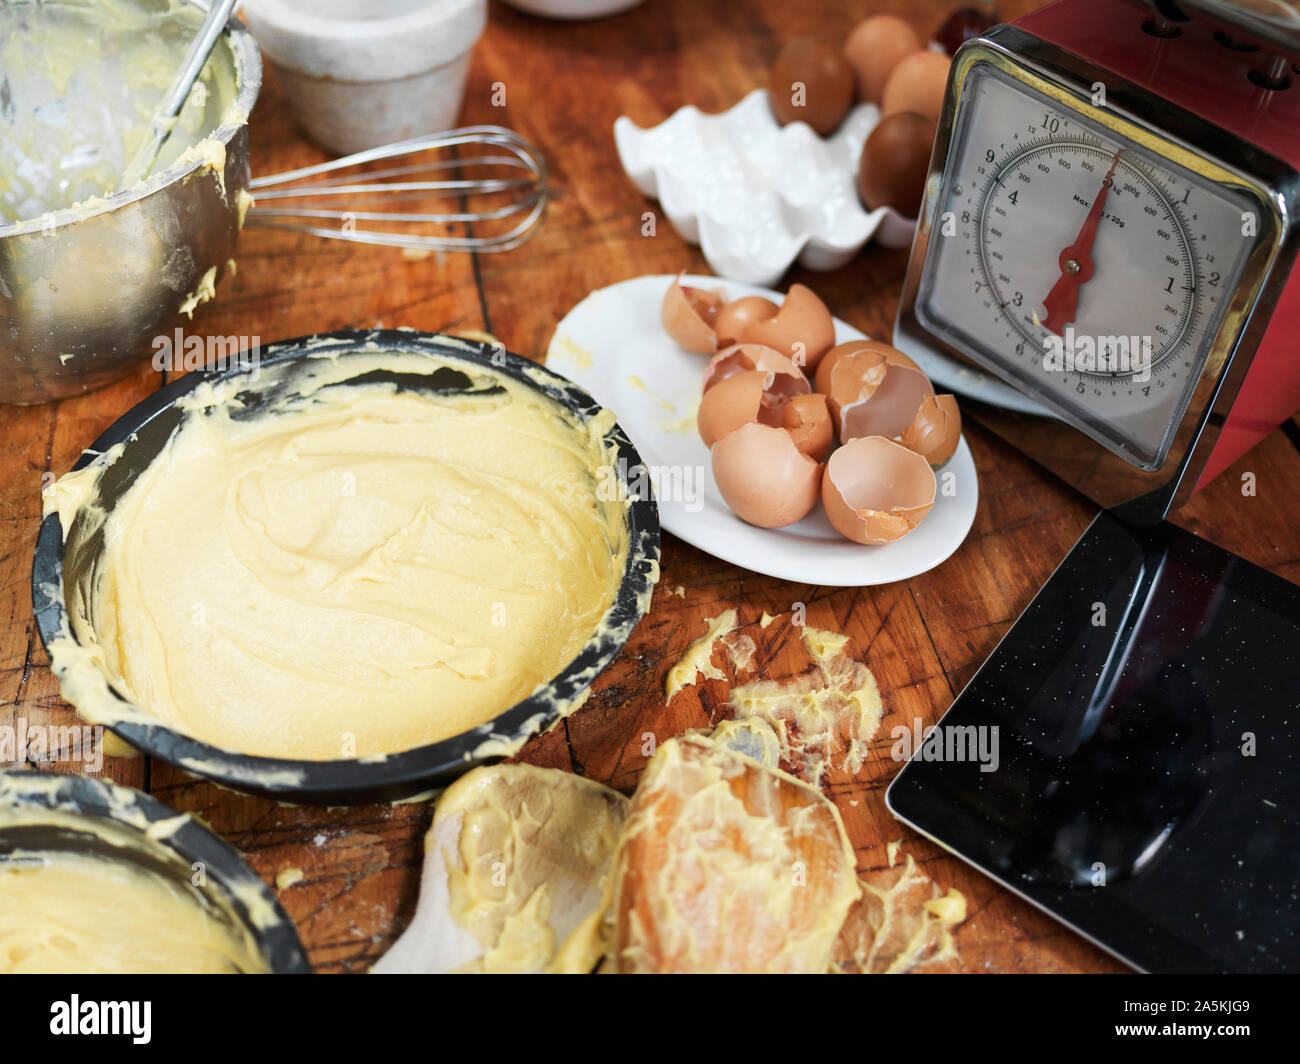 Messy baking preparation on kitchen table with cake mixture, kitchen scales, kitchen utensils and digital tablet Stock Photo